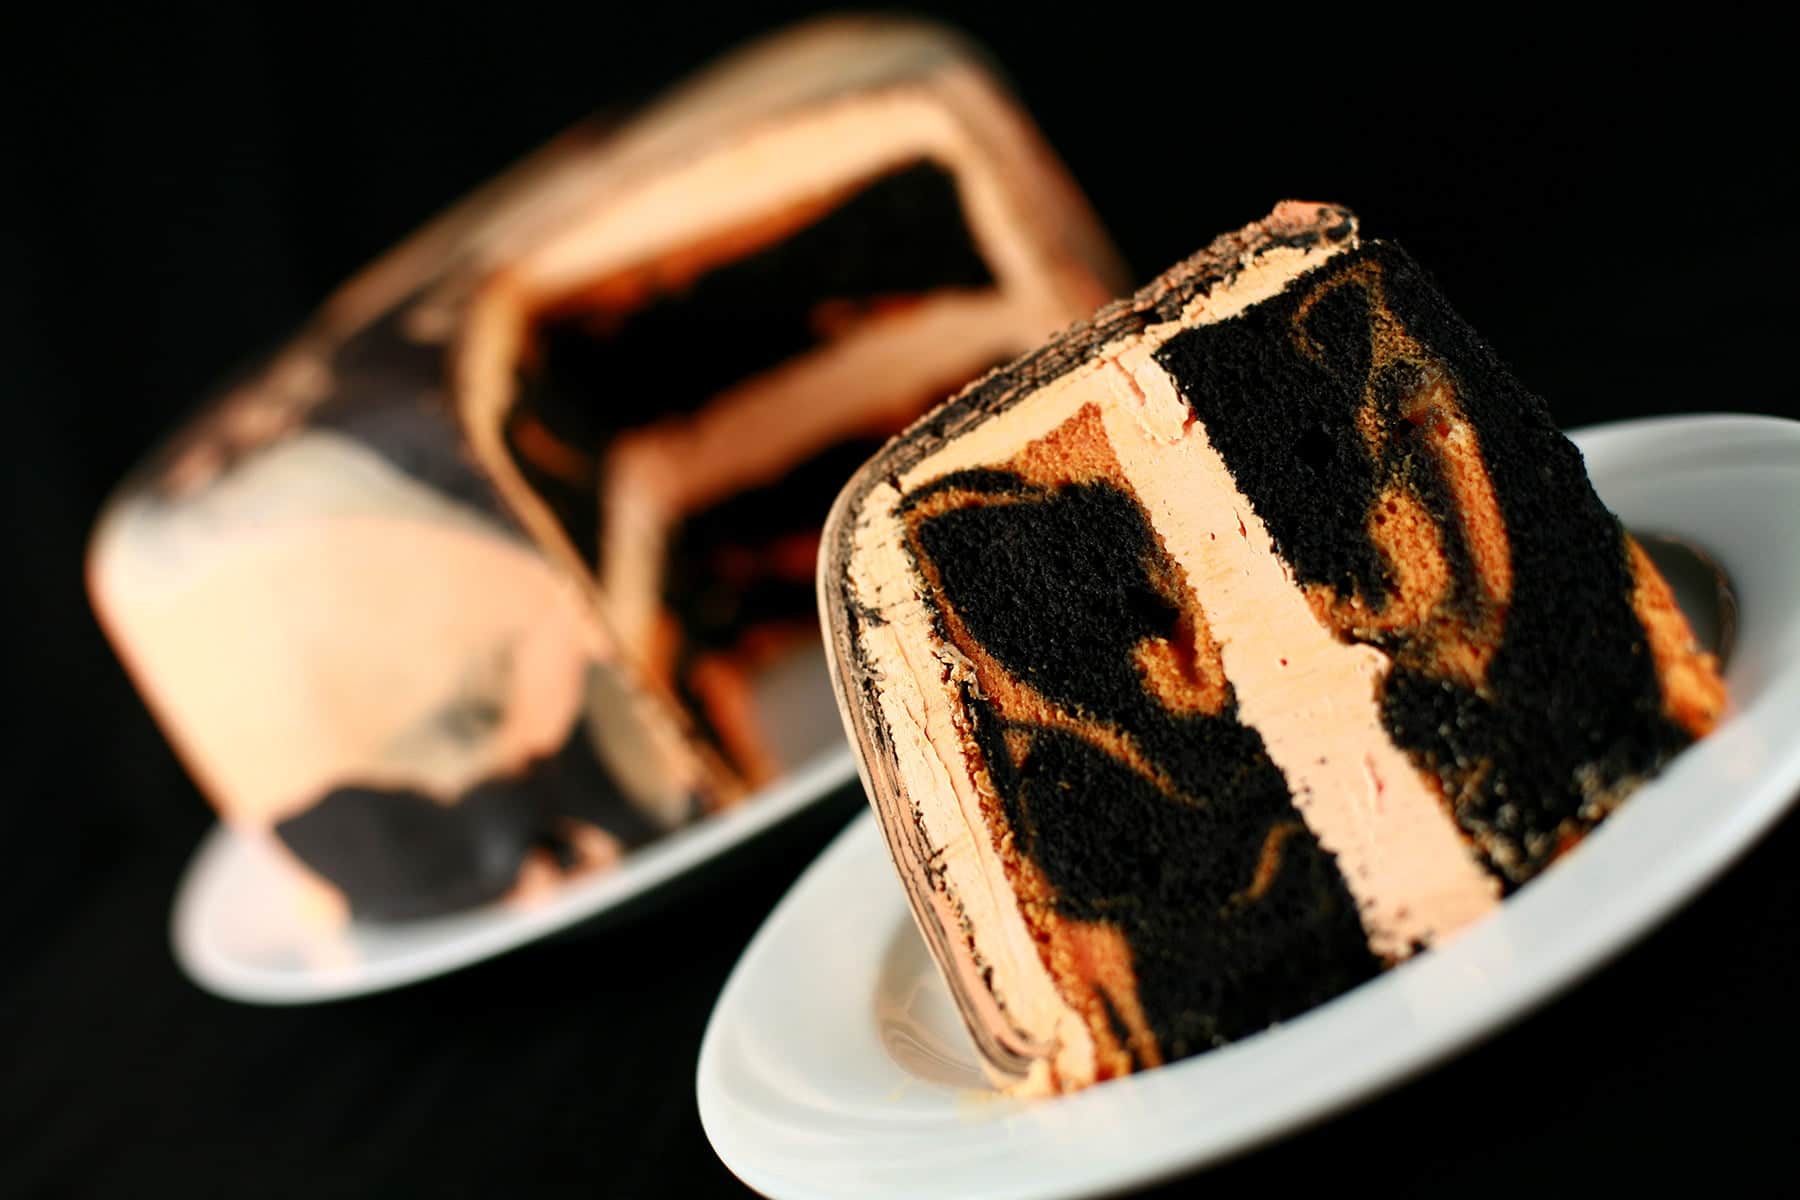 A large round tiger tail cake - black licorice and orange marbled cake, with orange buttercream - is shown with a slcie cut out, and served on a plate in front of it.